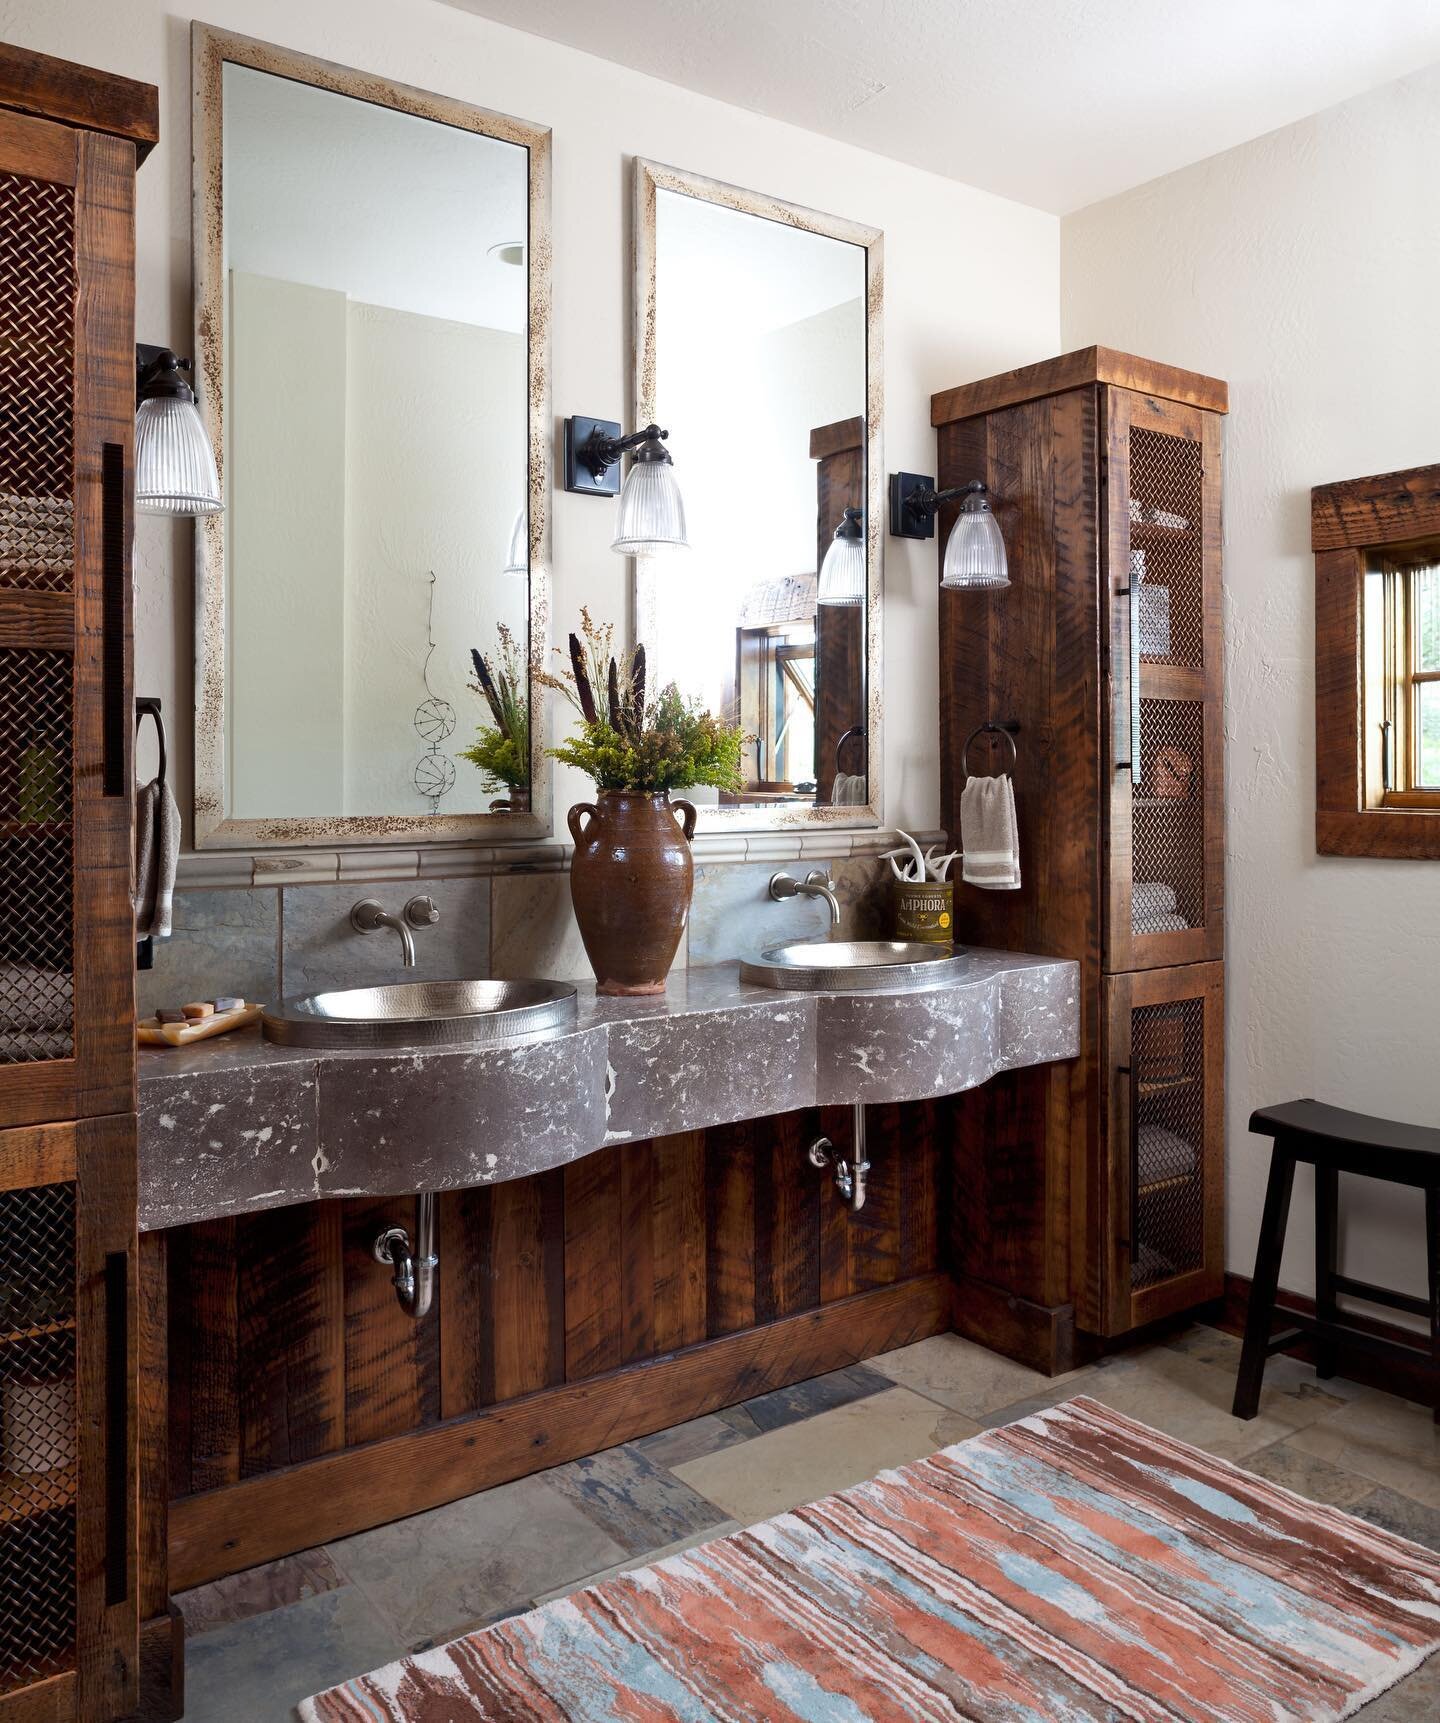 This rustic bathroom is in what we call &ldquo;the exercise barn,&rdquo; where our clients have both their home gym and home office. Look in the left mirror, see something shiny and silver? Nancy and I found a bra made out of barbed wire at the local